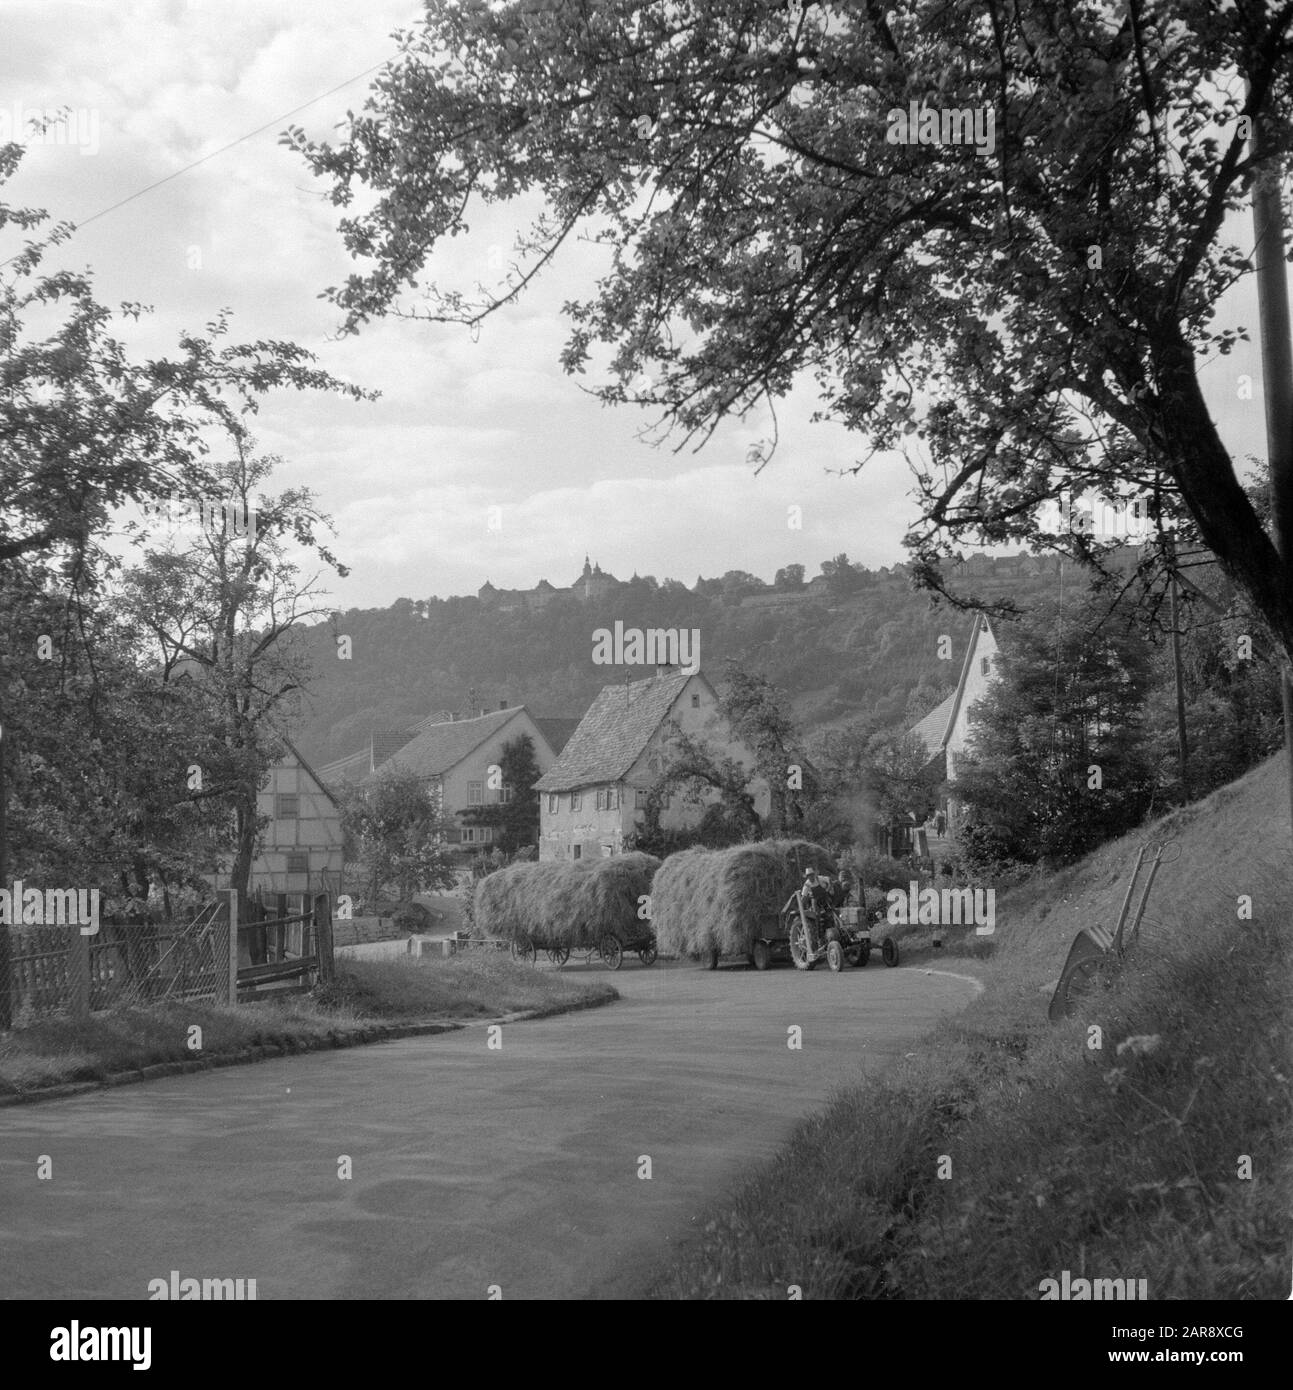 Hohenloher Land  Tractor with wagons hay in Bächlingen, on the hill Castle Langenburg Date: 1954 Location: Baden-Württemberg, Bächlingen, Germany, West Germany Keywords: village images, hay, castles, agriculture, tractors Stock Photo